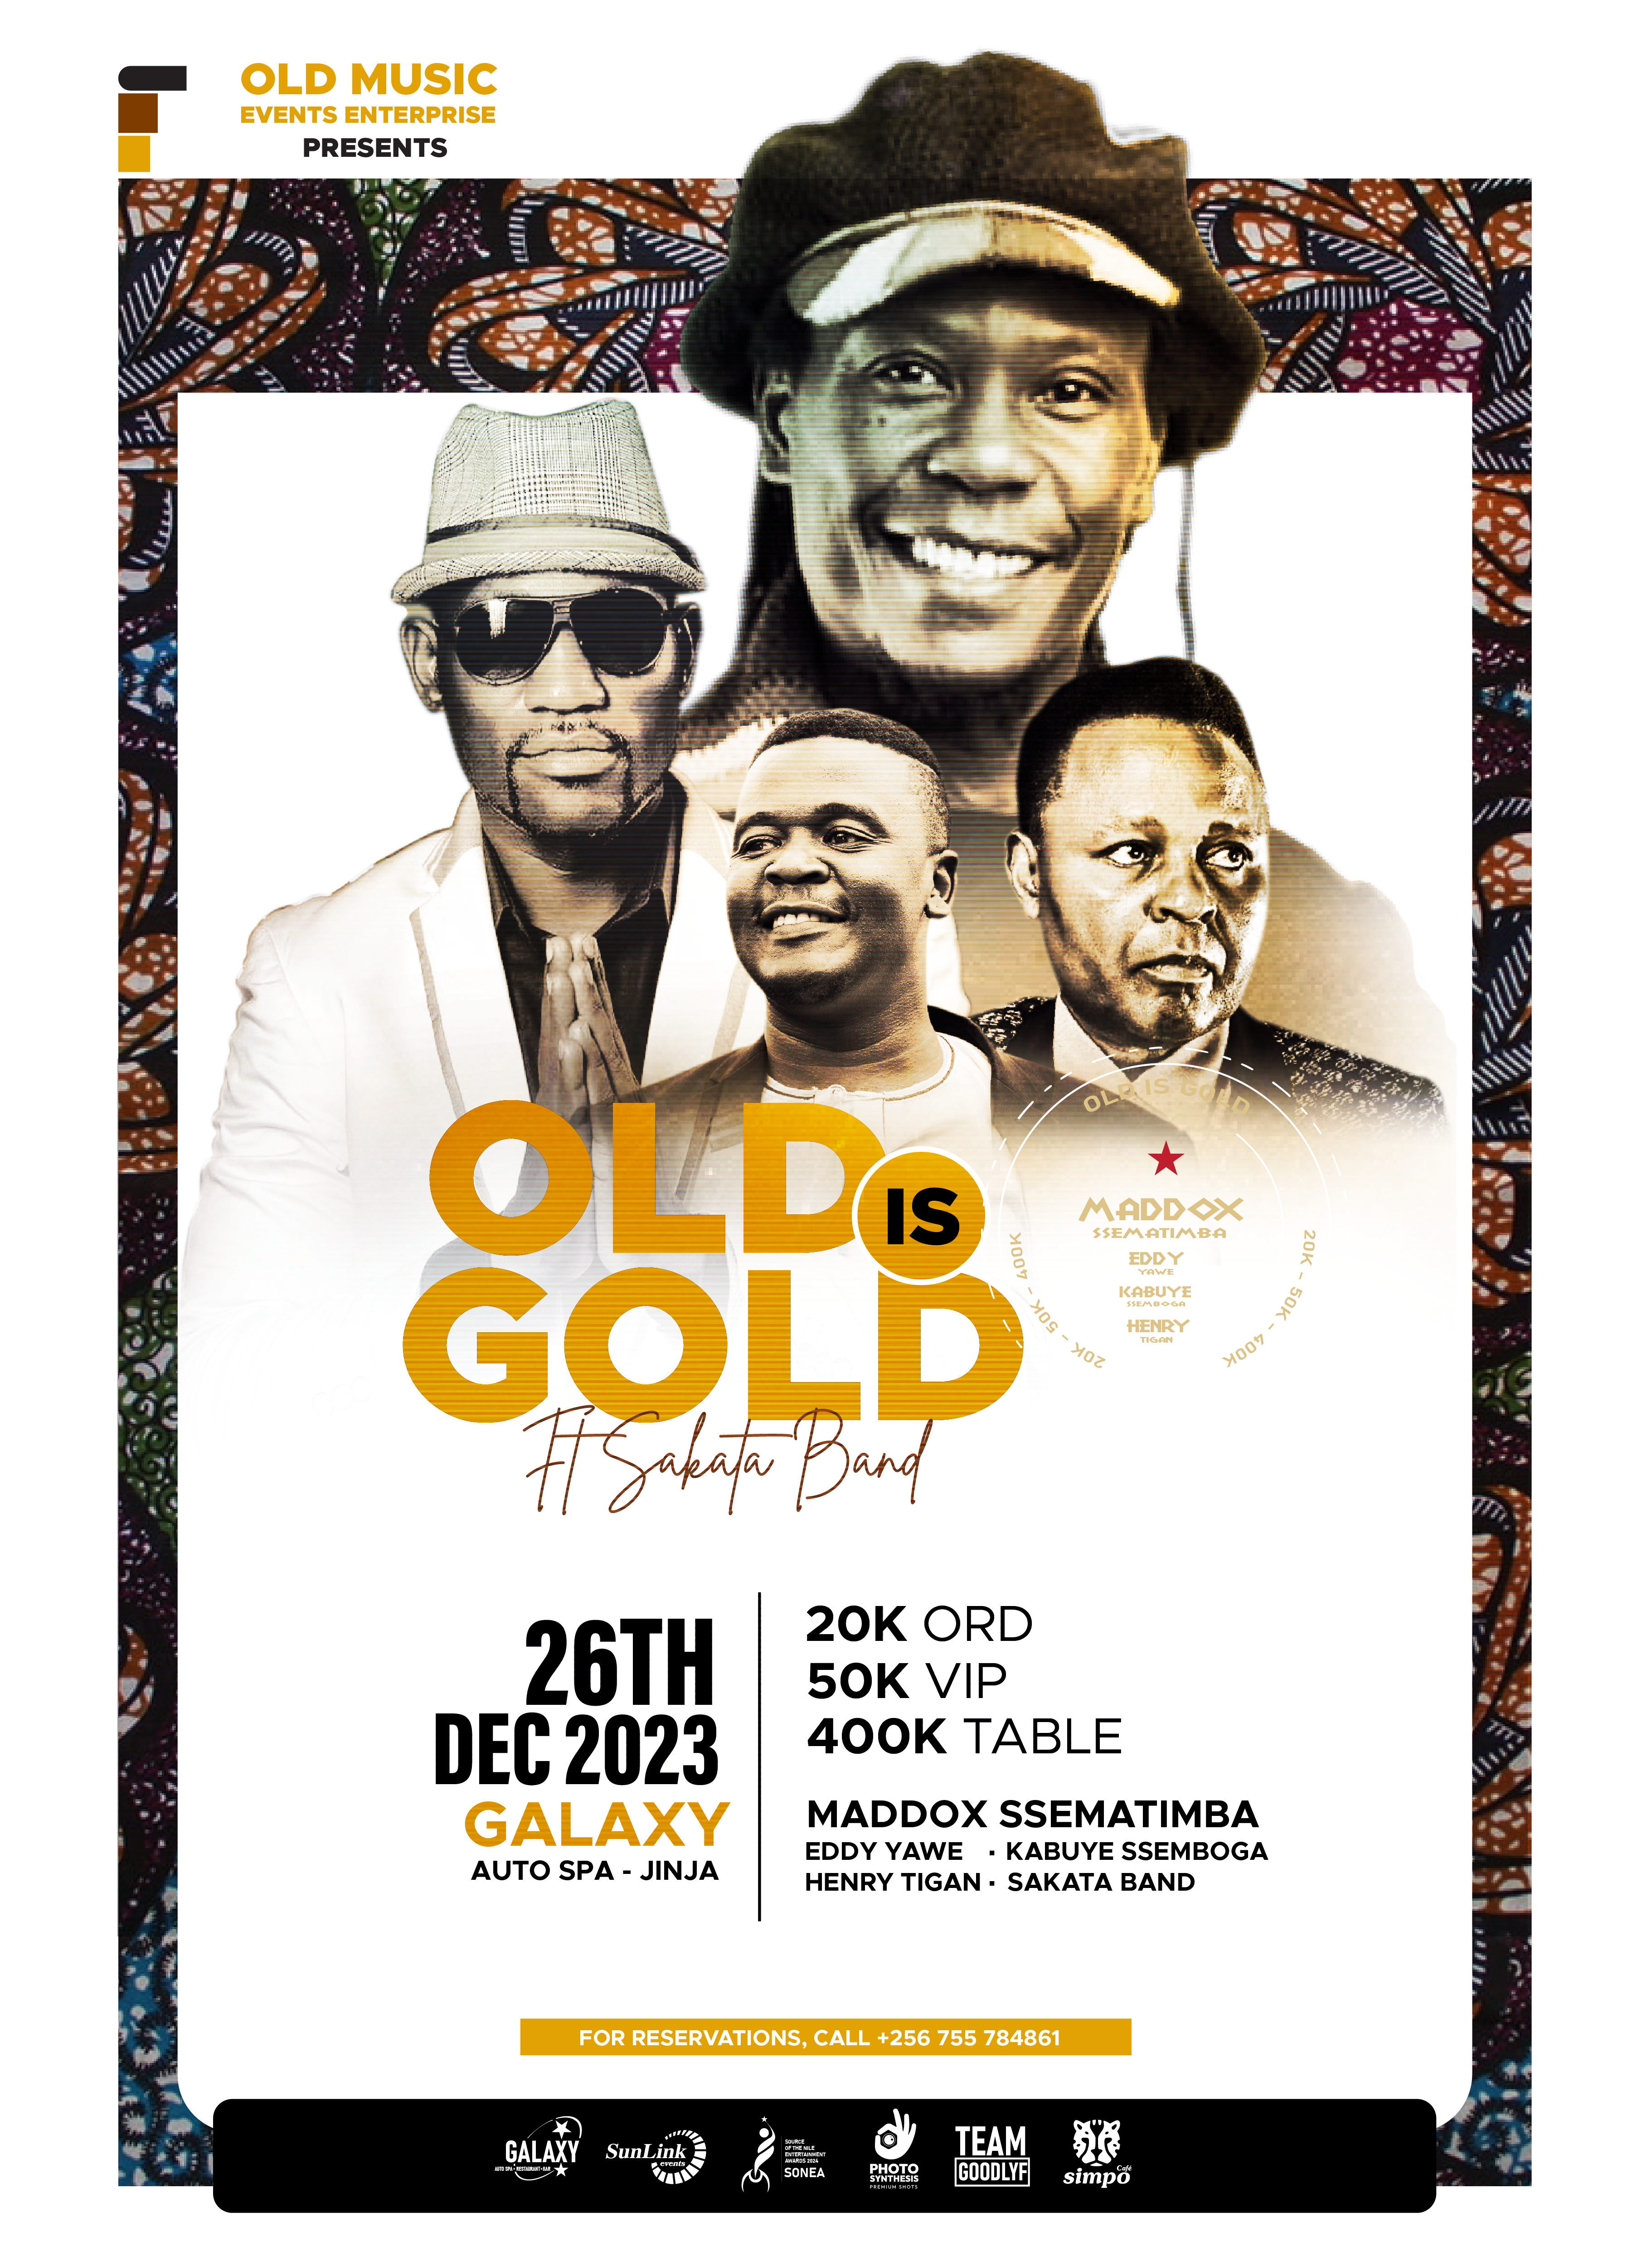 Old is Gold event in Jinja